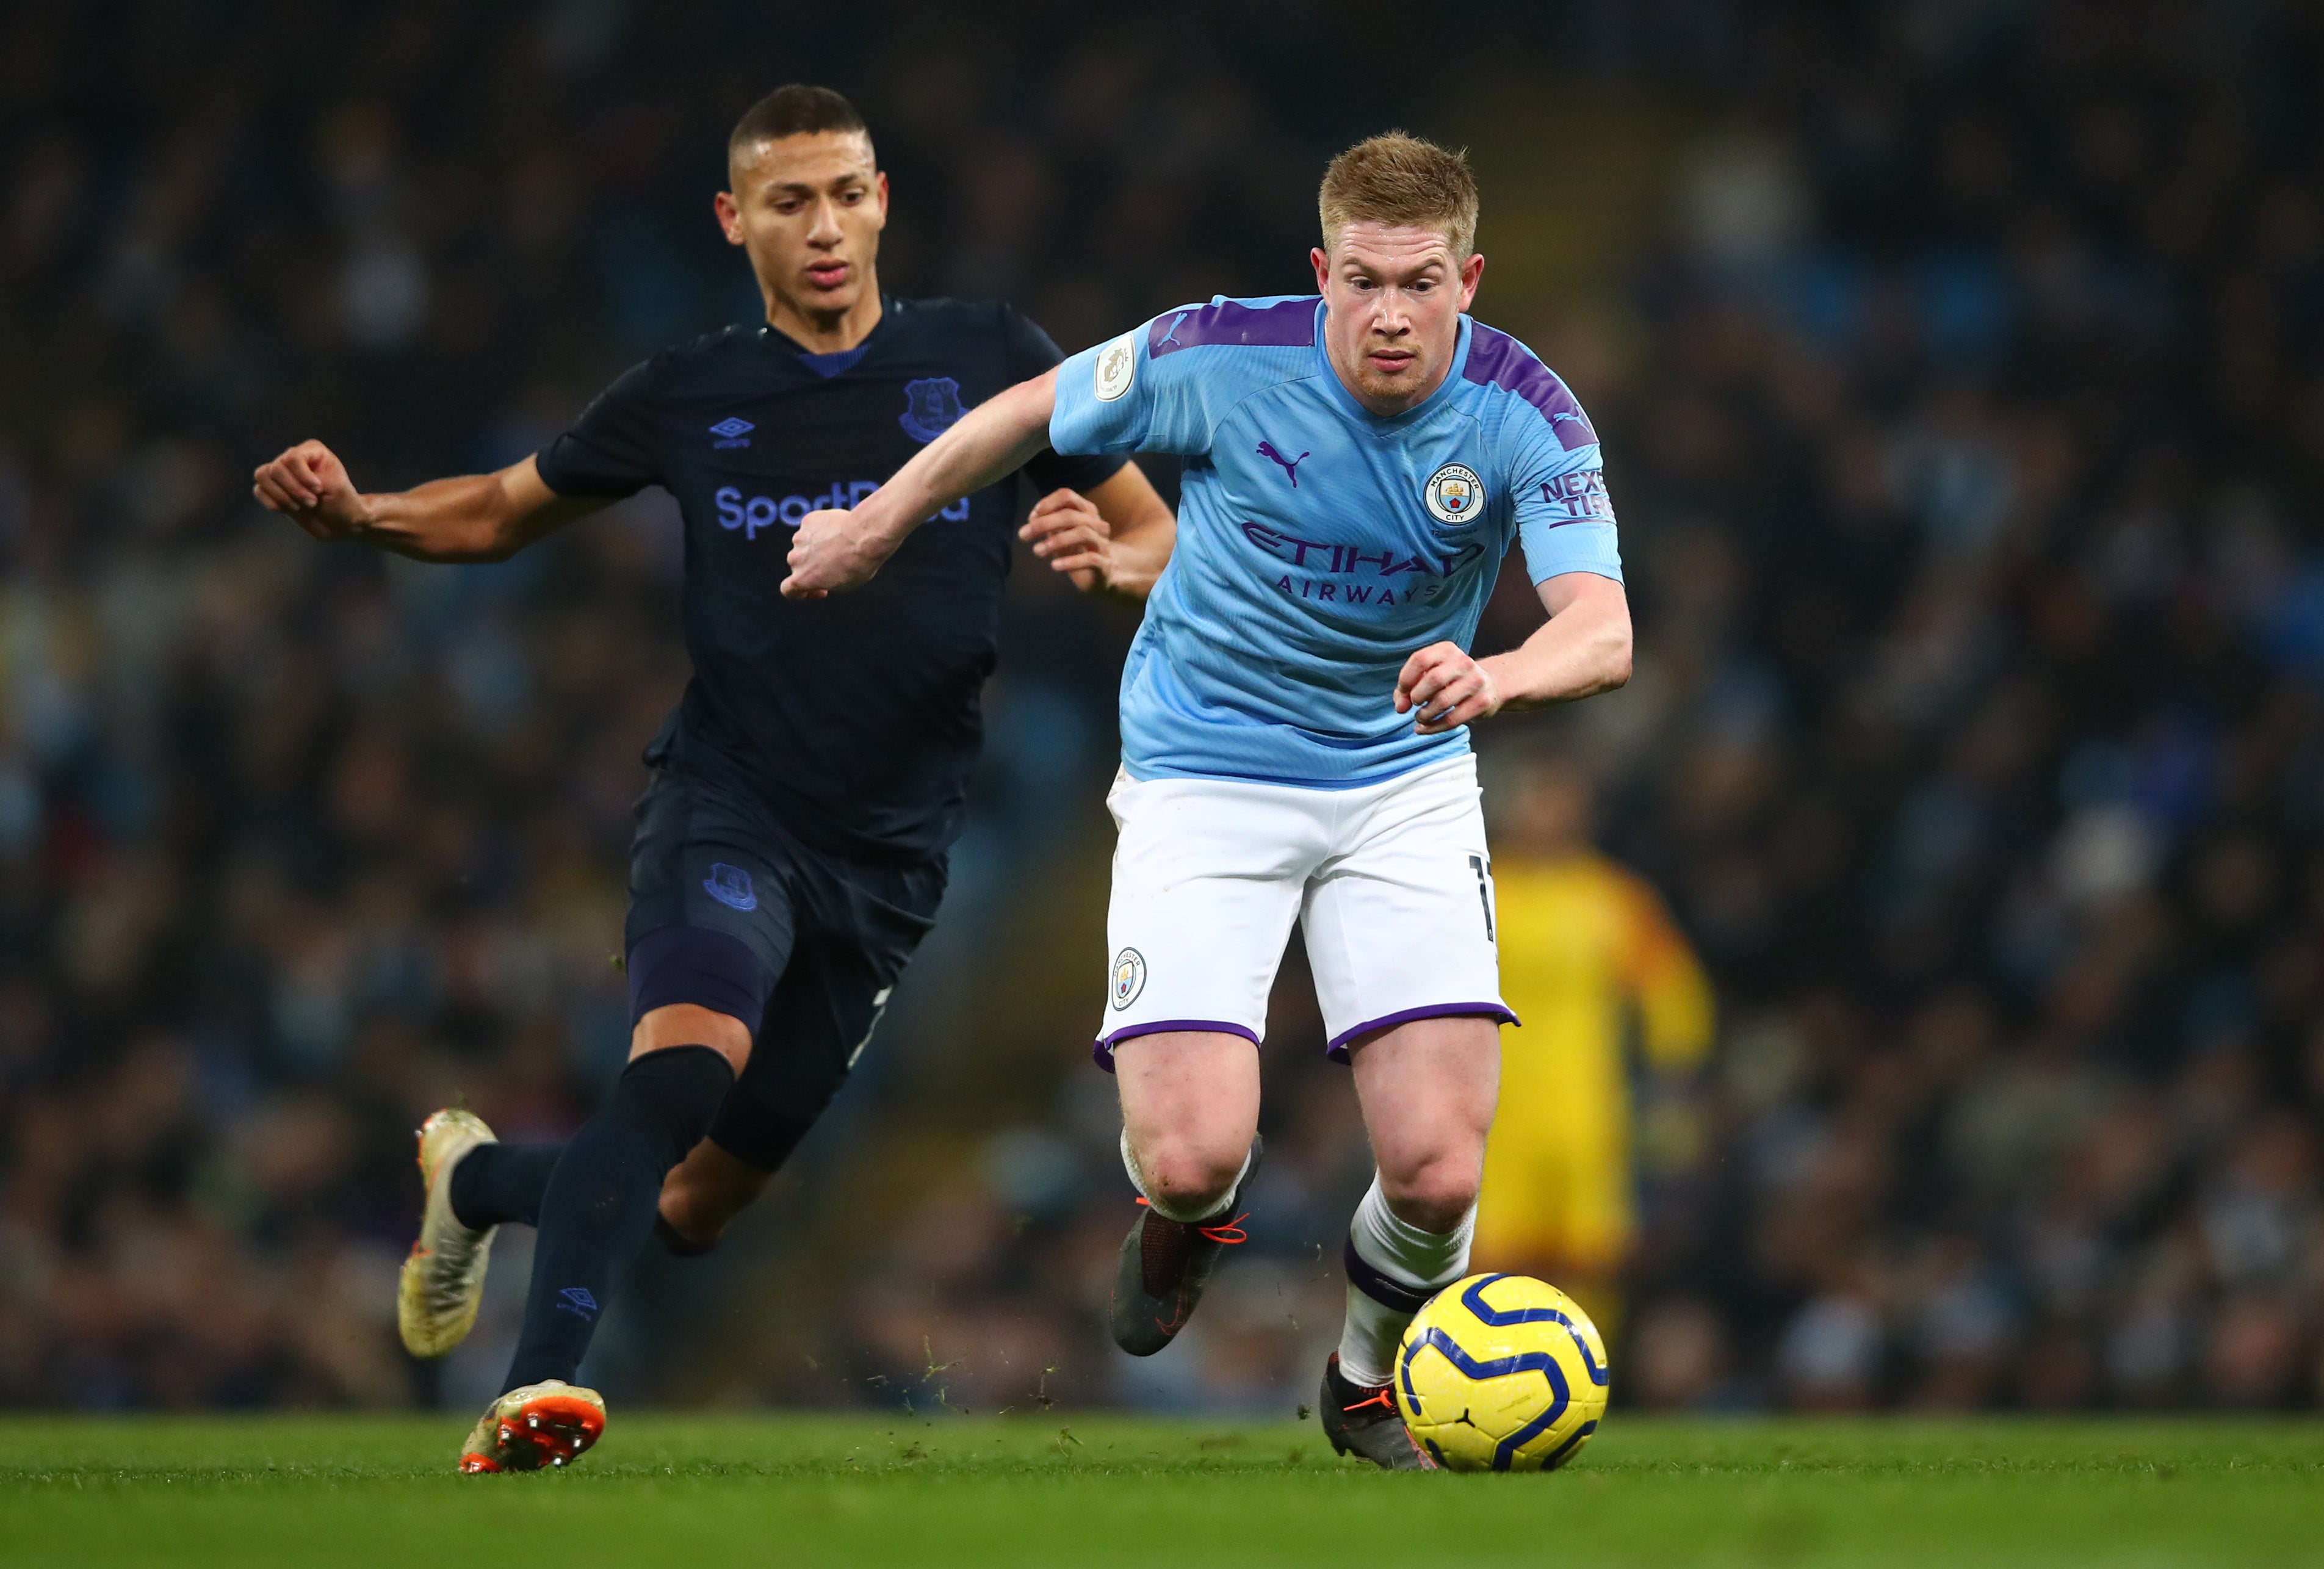 Everton’s Richarlison and Manchester City’s Kevin De Bruyne